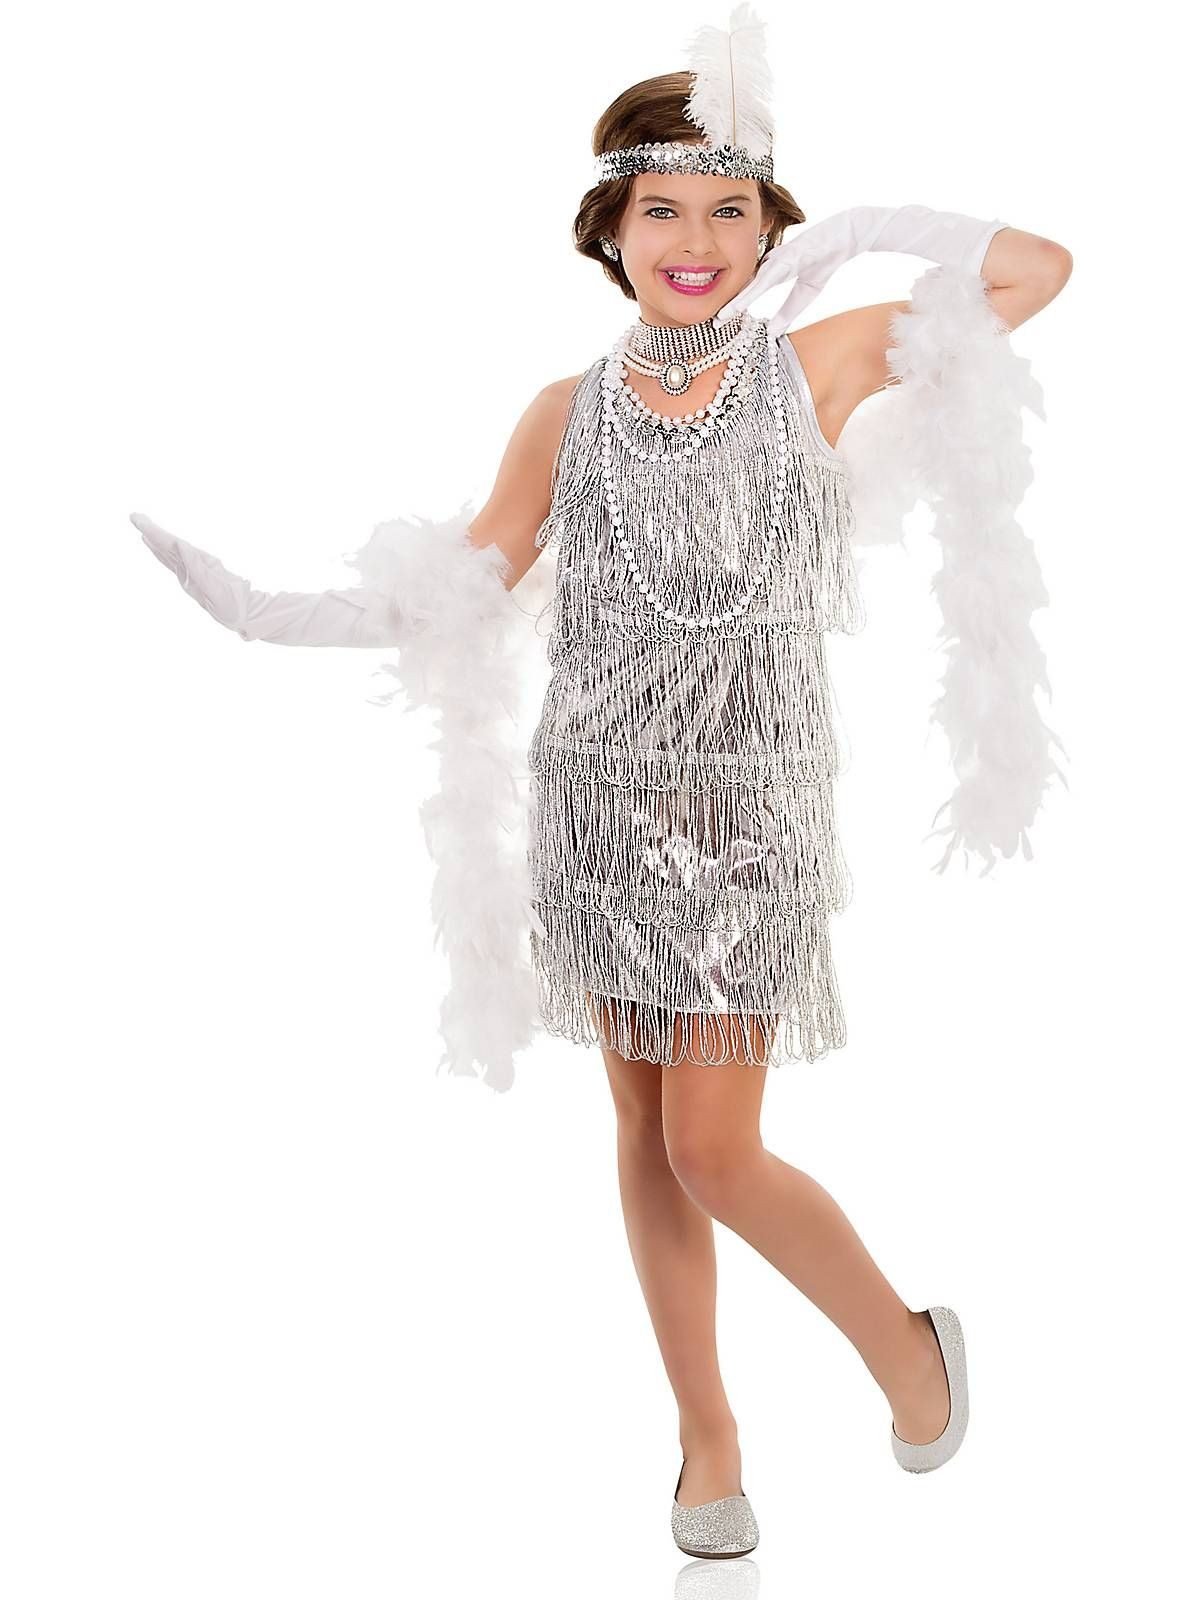 DIY Flapper Girl Costume
 In the Roaring Twenties young women called flappers